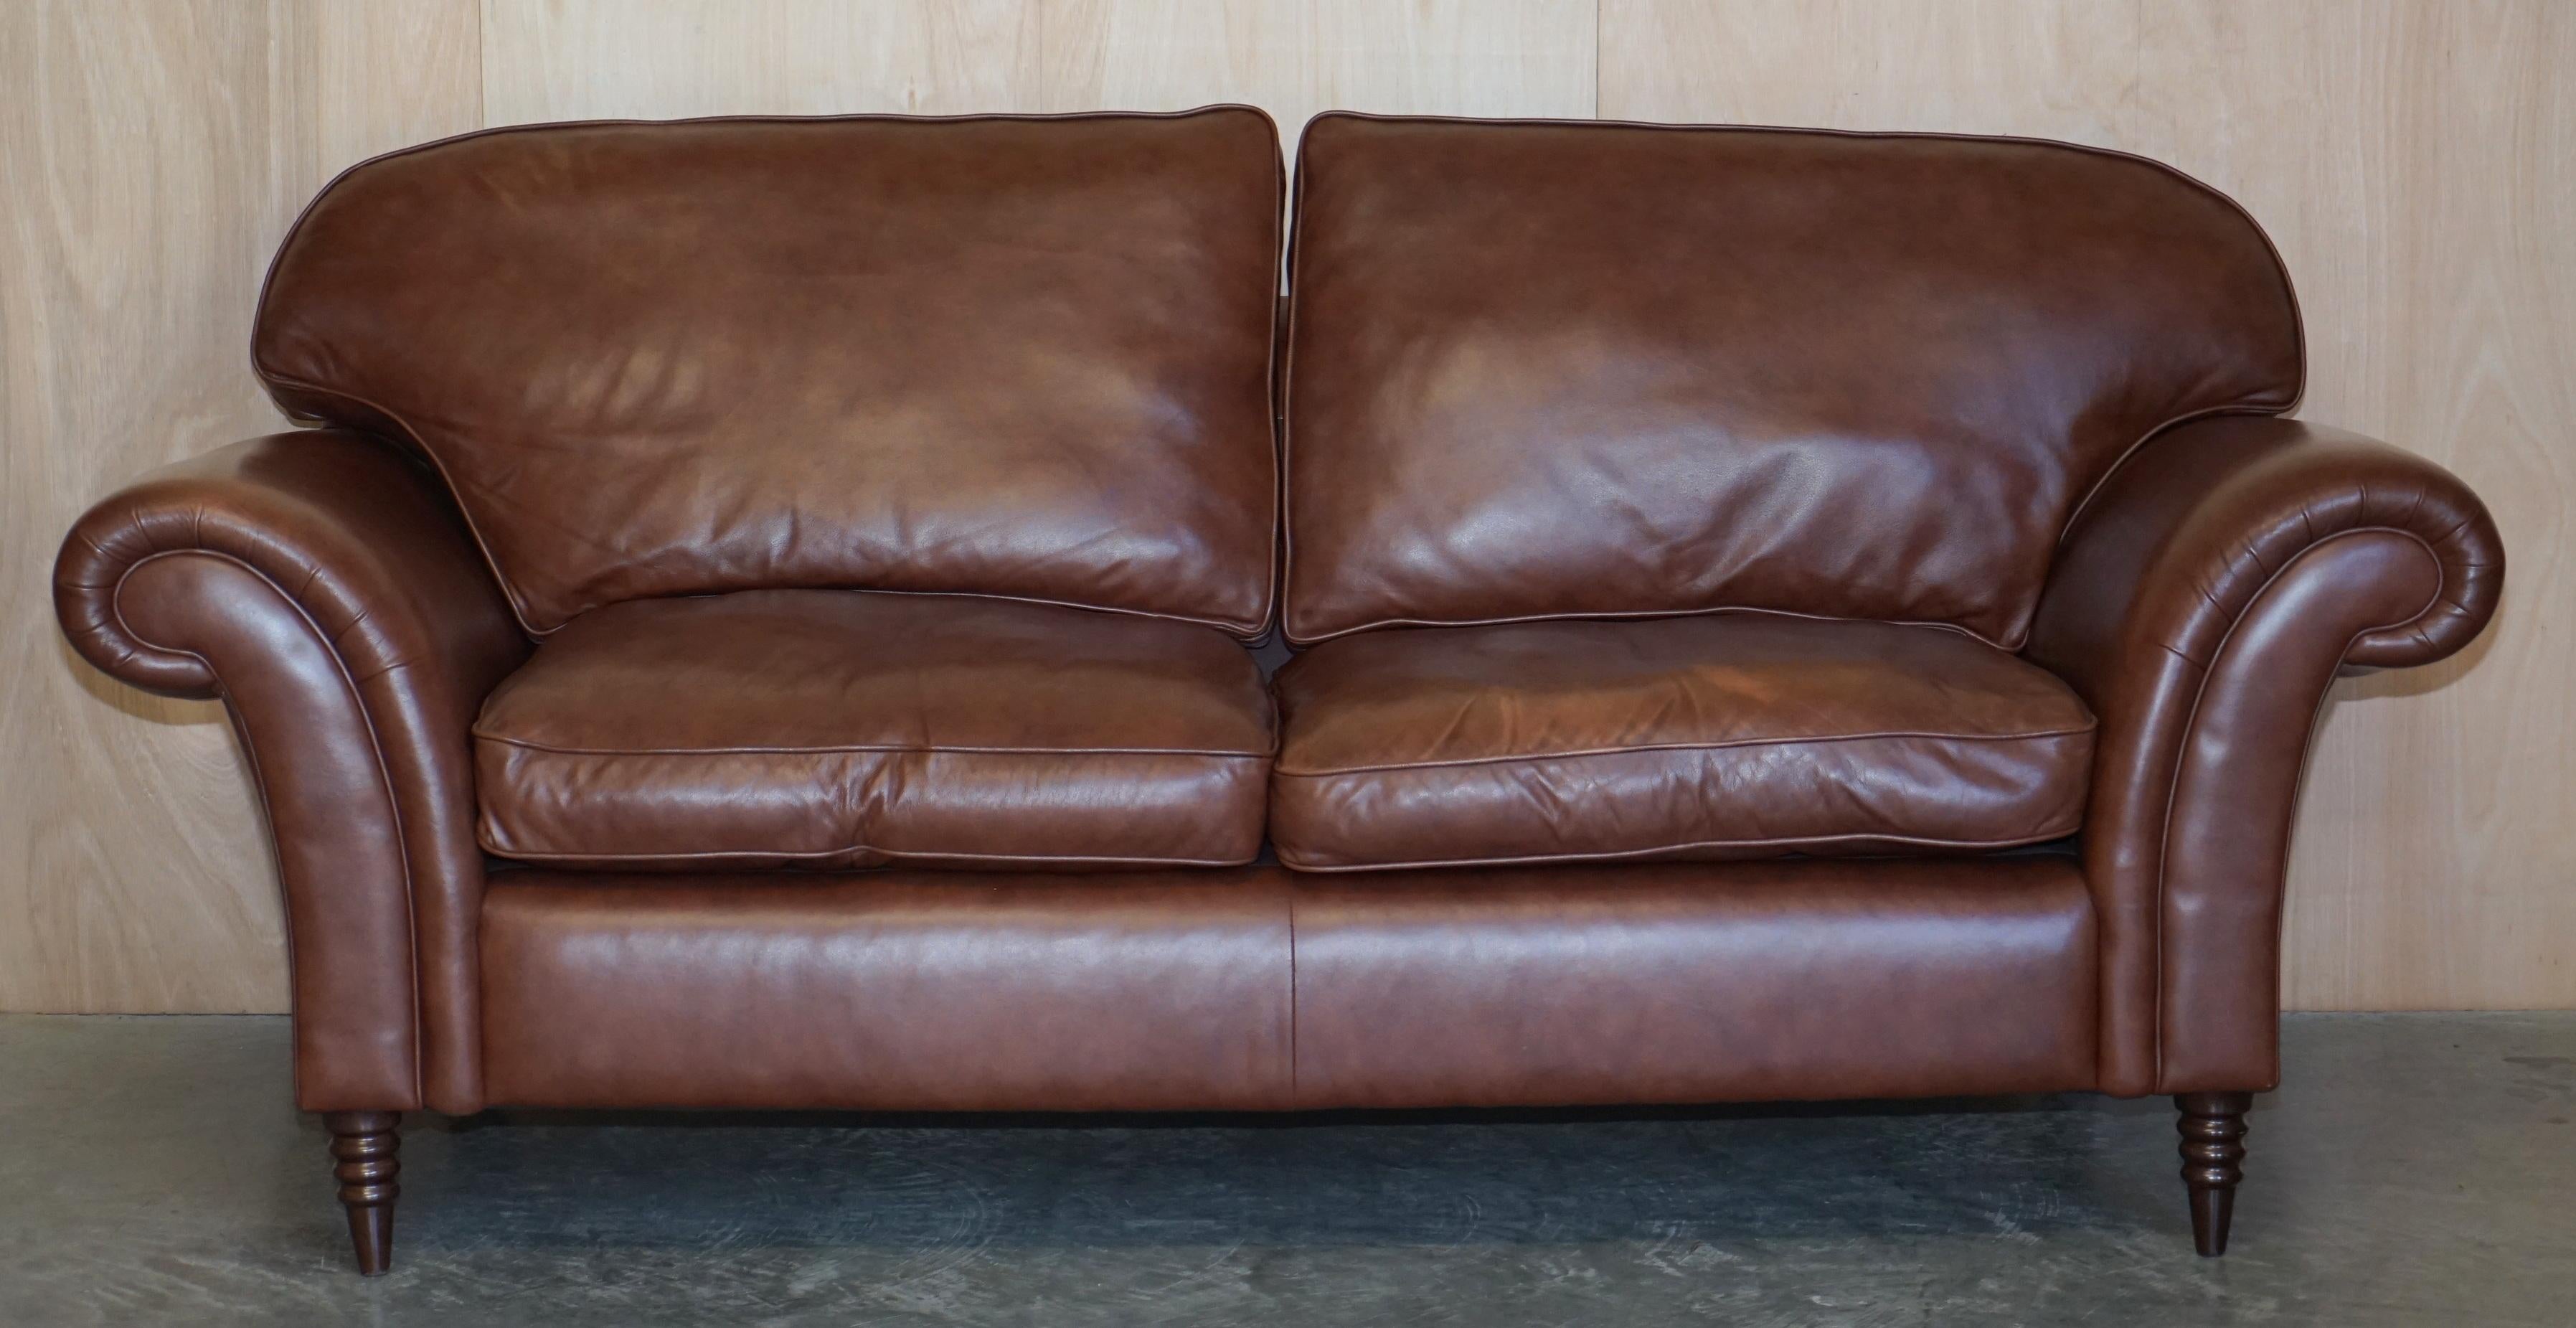 We are delighted to offer for sale this lovely Laura Ashley, Mortimer II heritage brown leather three seat sofa with castors

The sofa is very comfortable, it has fibre filled cushions which feel like feathers but retail there shape better

In